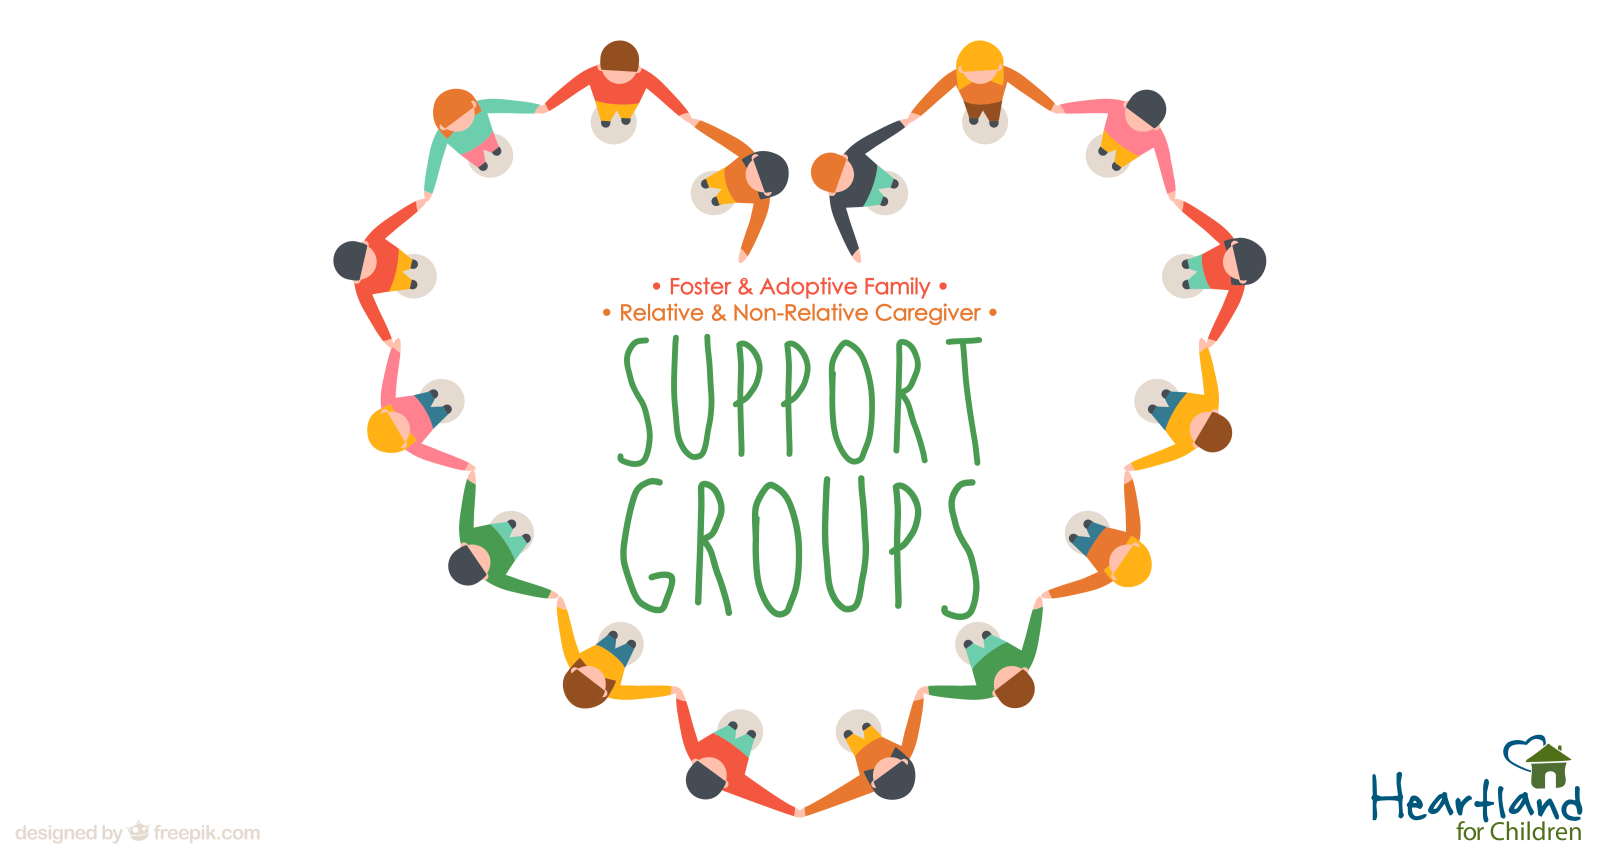 A number of support groups are available for foster and